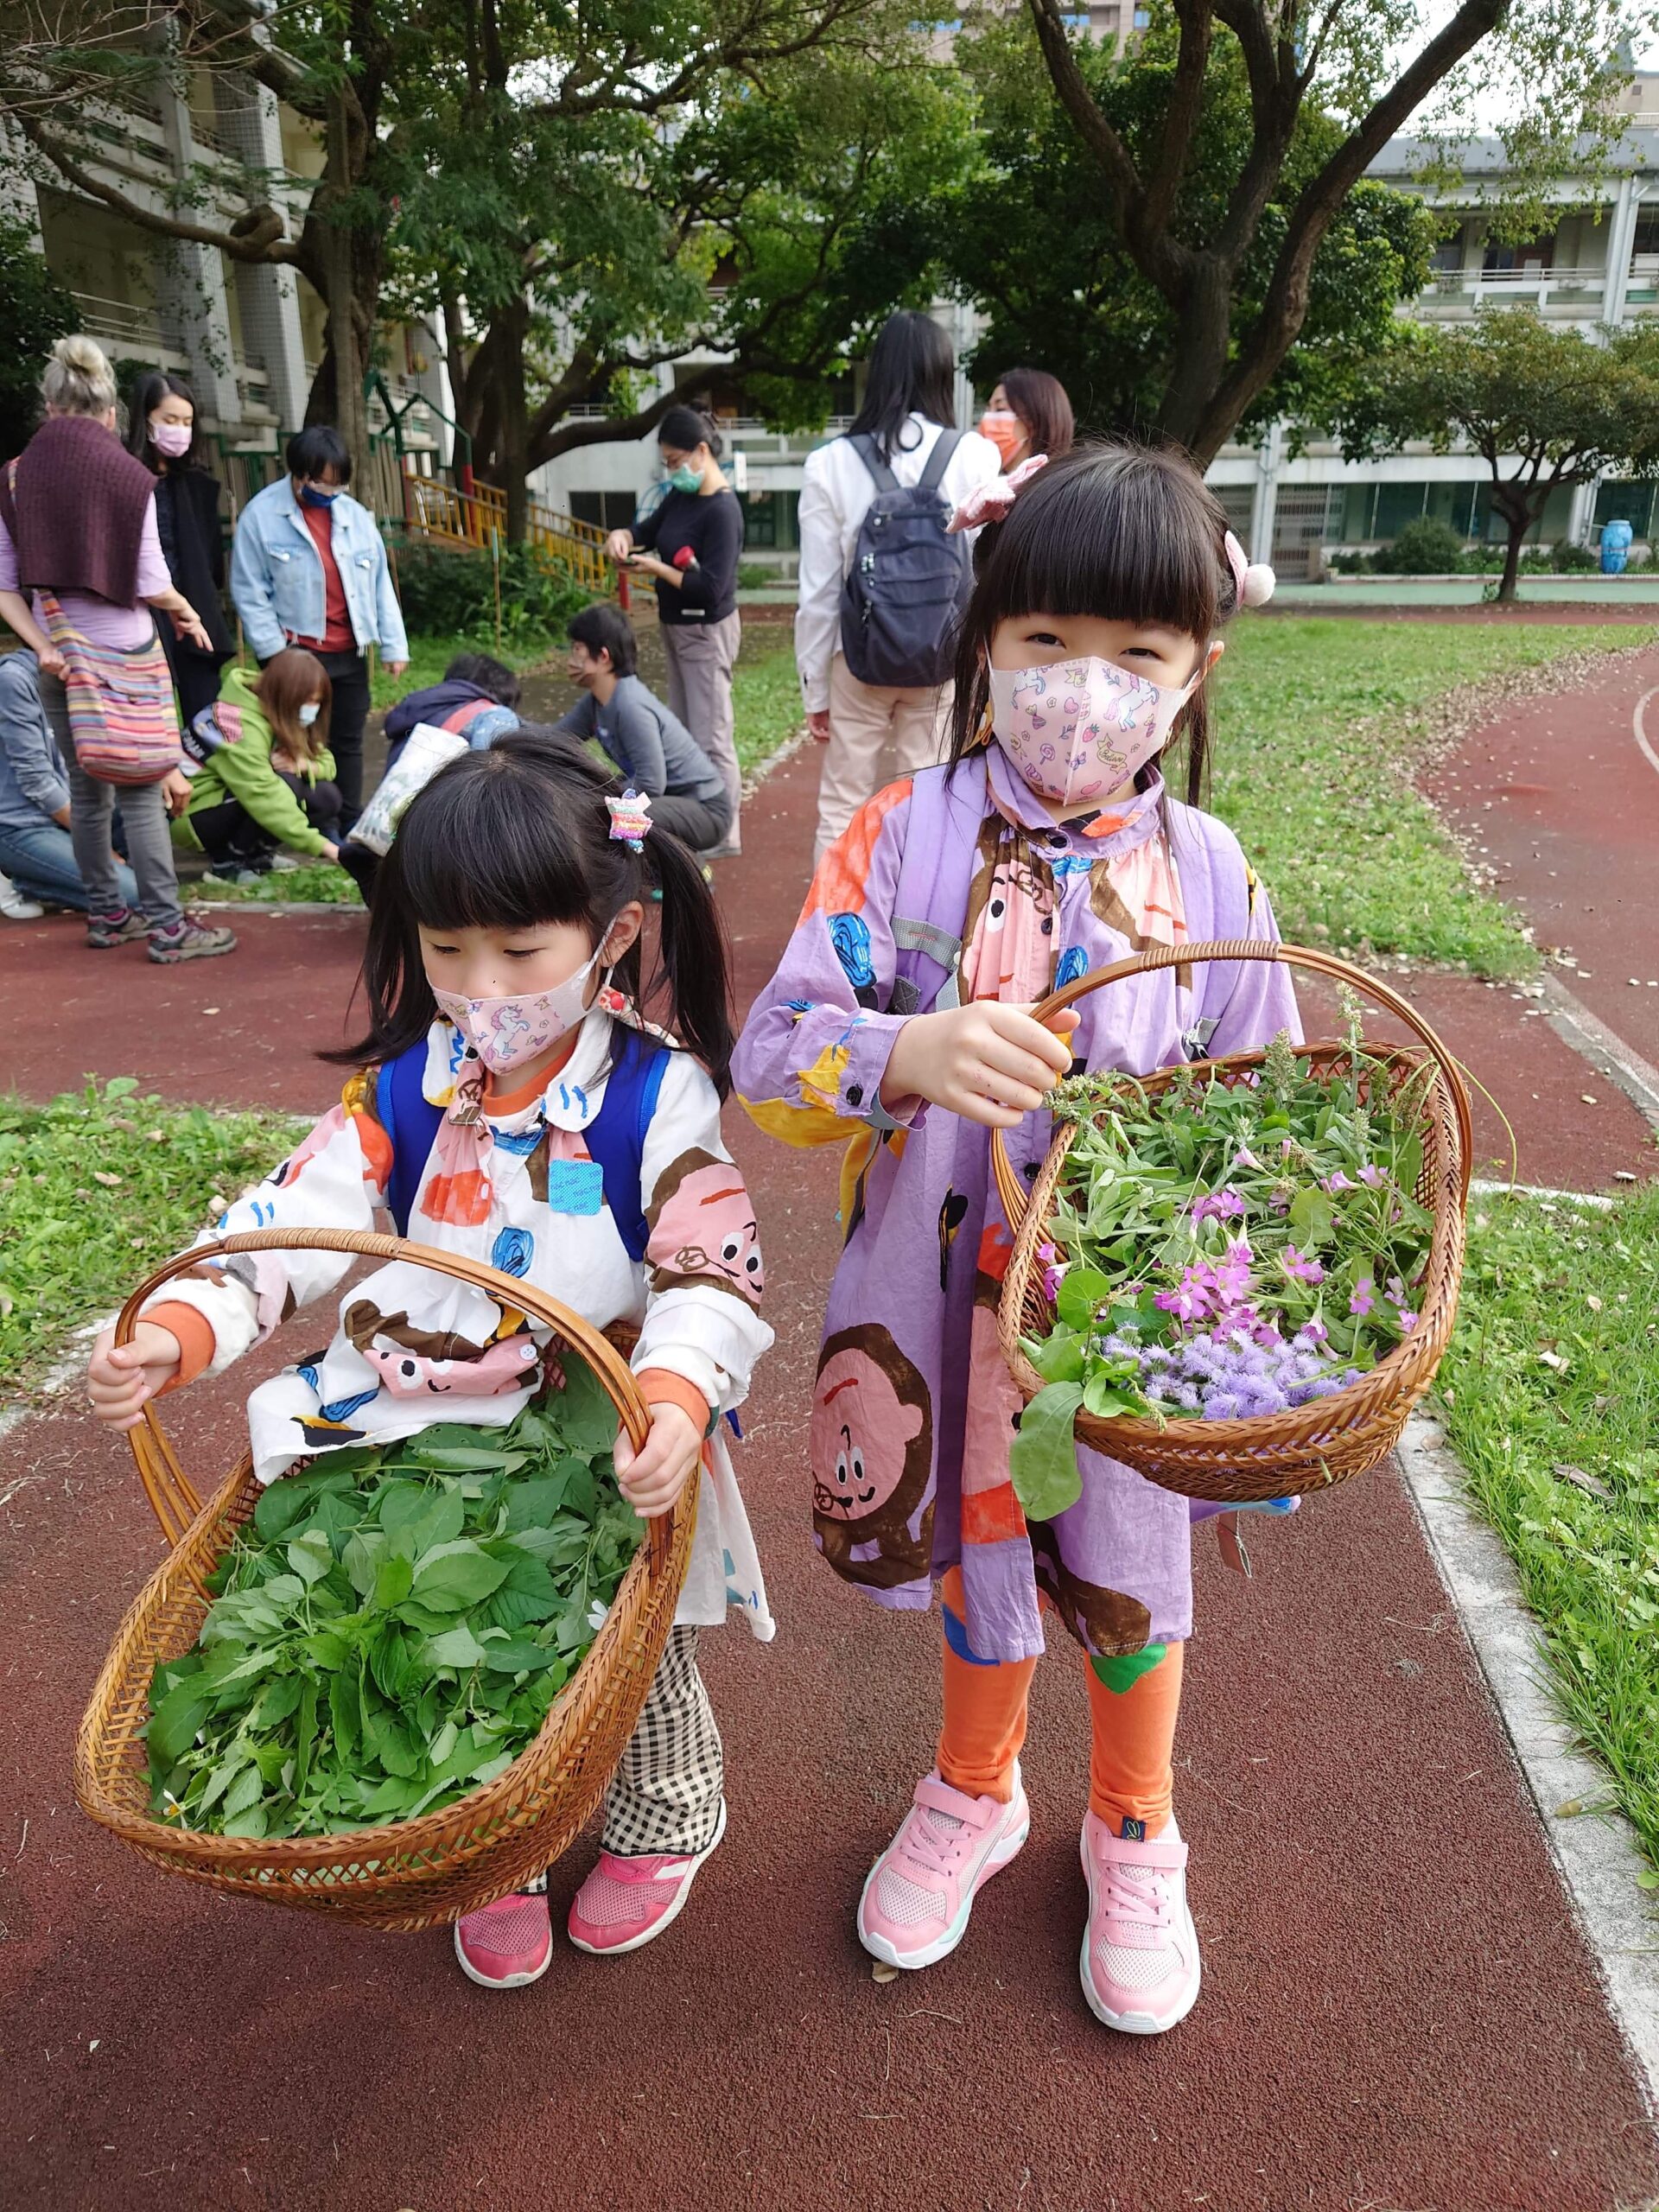 Two small children wearing pigtails hold baskets full of greens they have foraged.